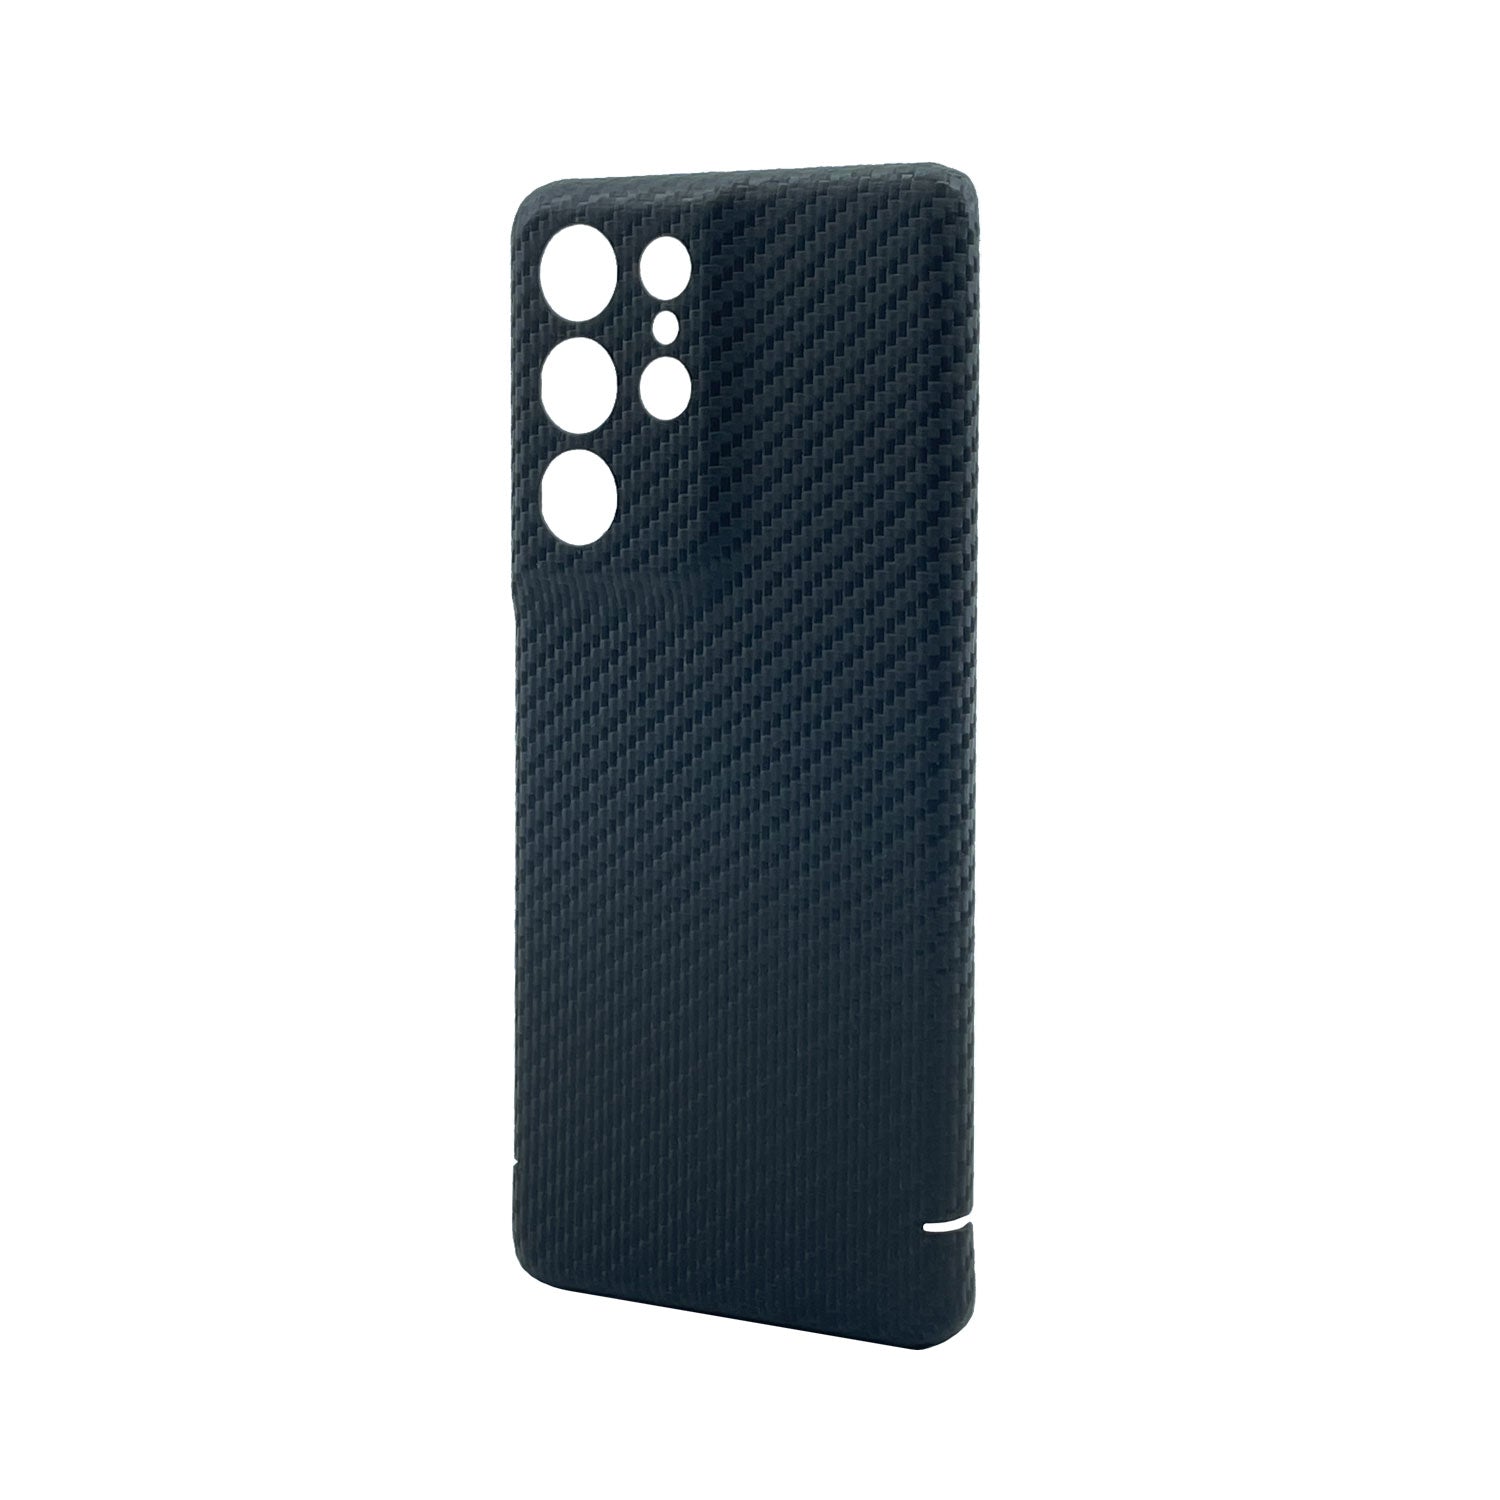 Nevox Carbonseries Cover for Samsung Galaxy S22 Ultra, Magnest Series